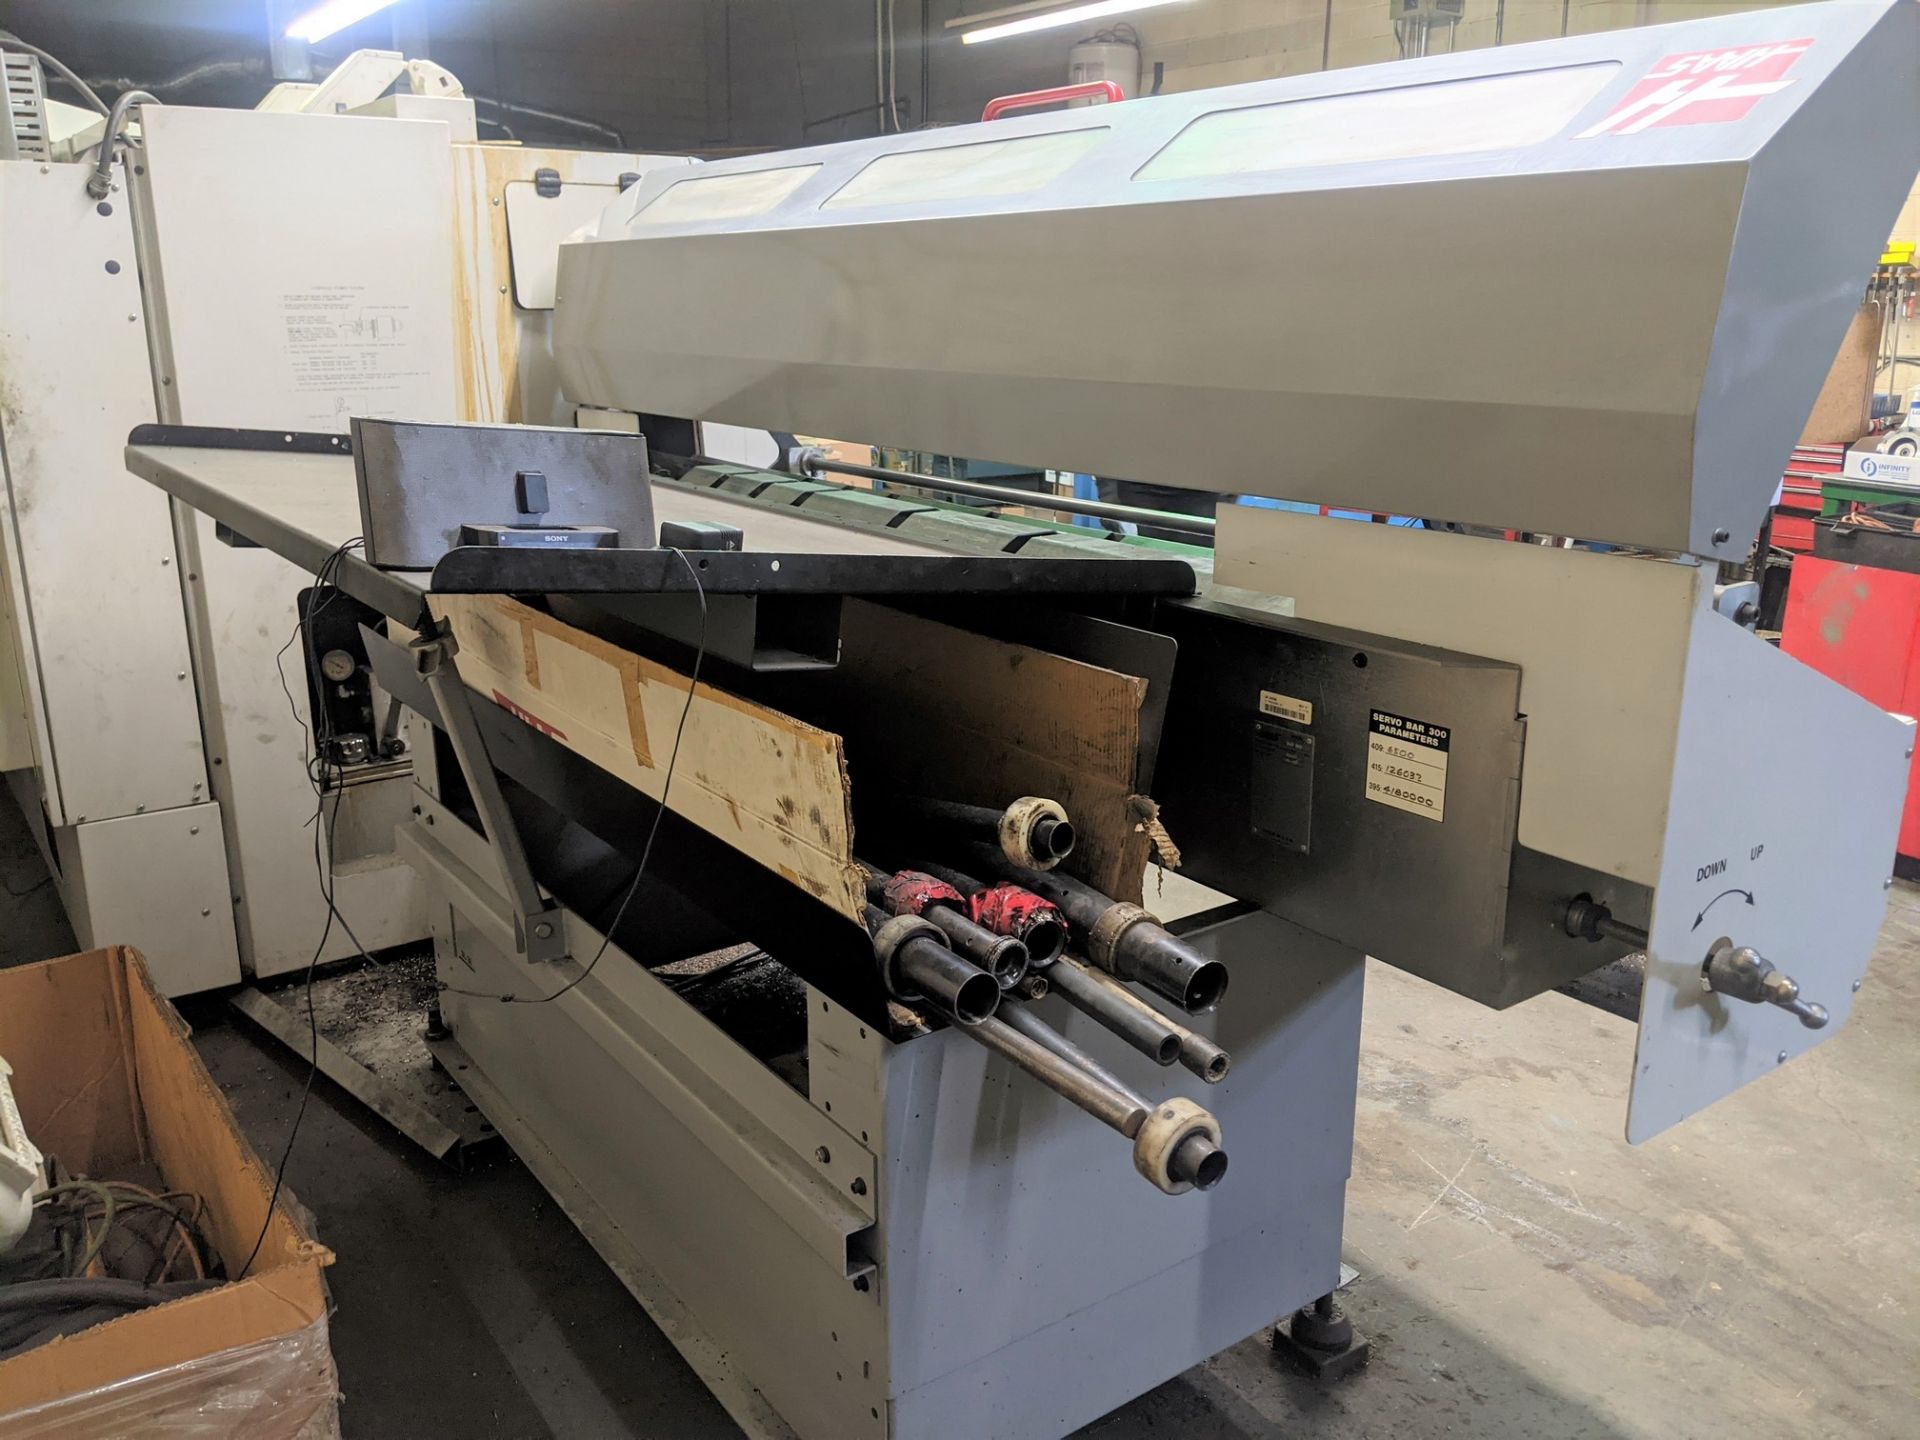 2005 HAAS SL-30T CNC LATHE, CNC CONTROL, 10” 3-JAW CHUCK, TAILSTOCK, TOOL PRESETTER, 12-STATION - Image 20 of 27